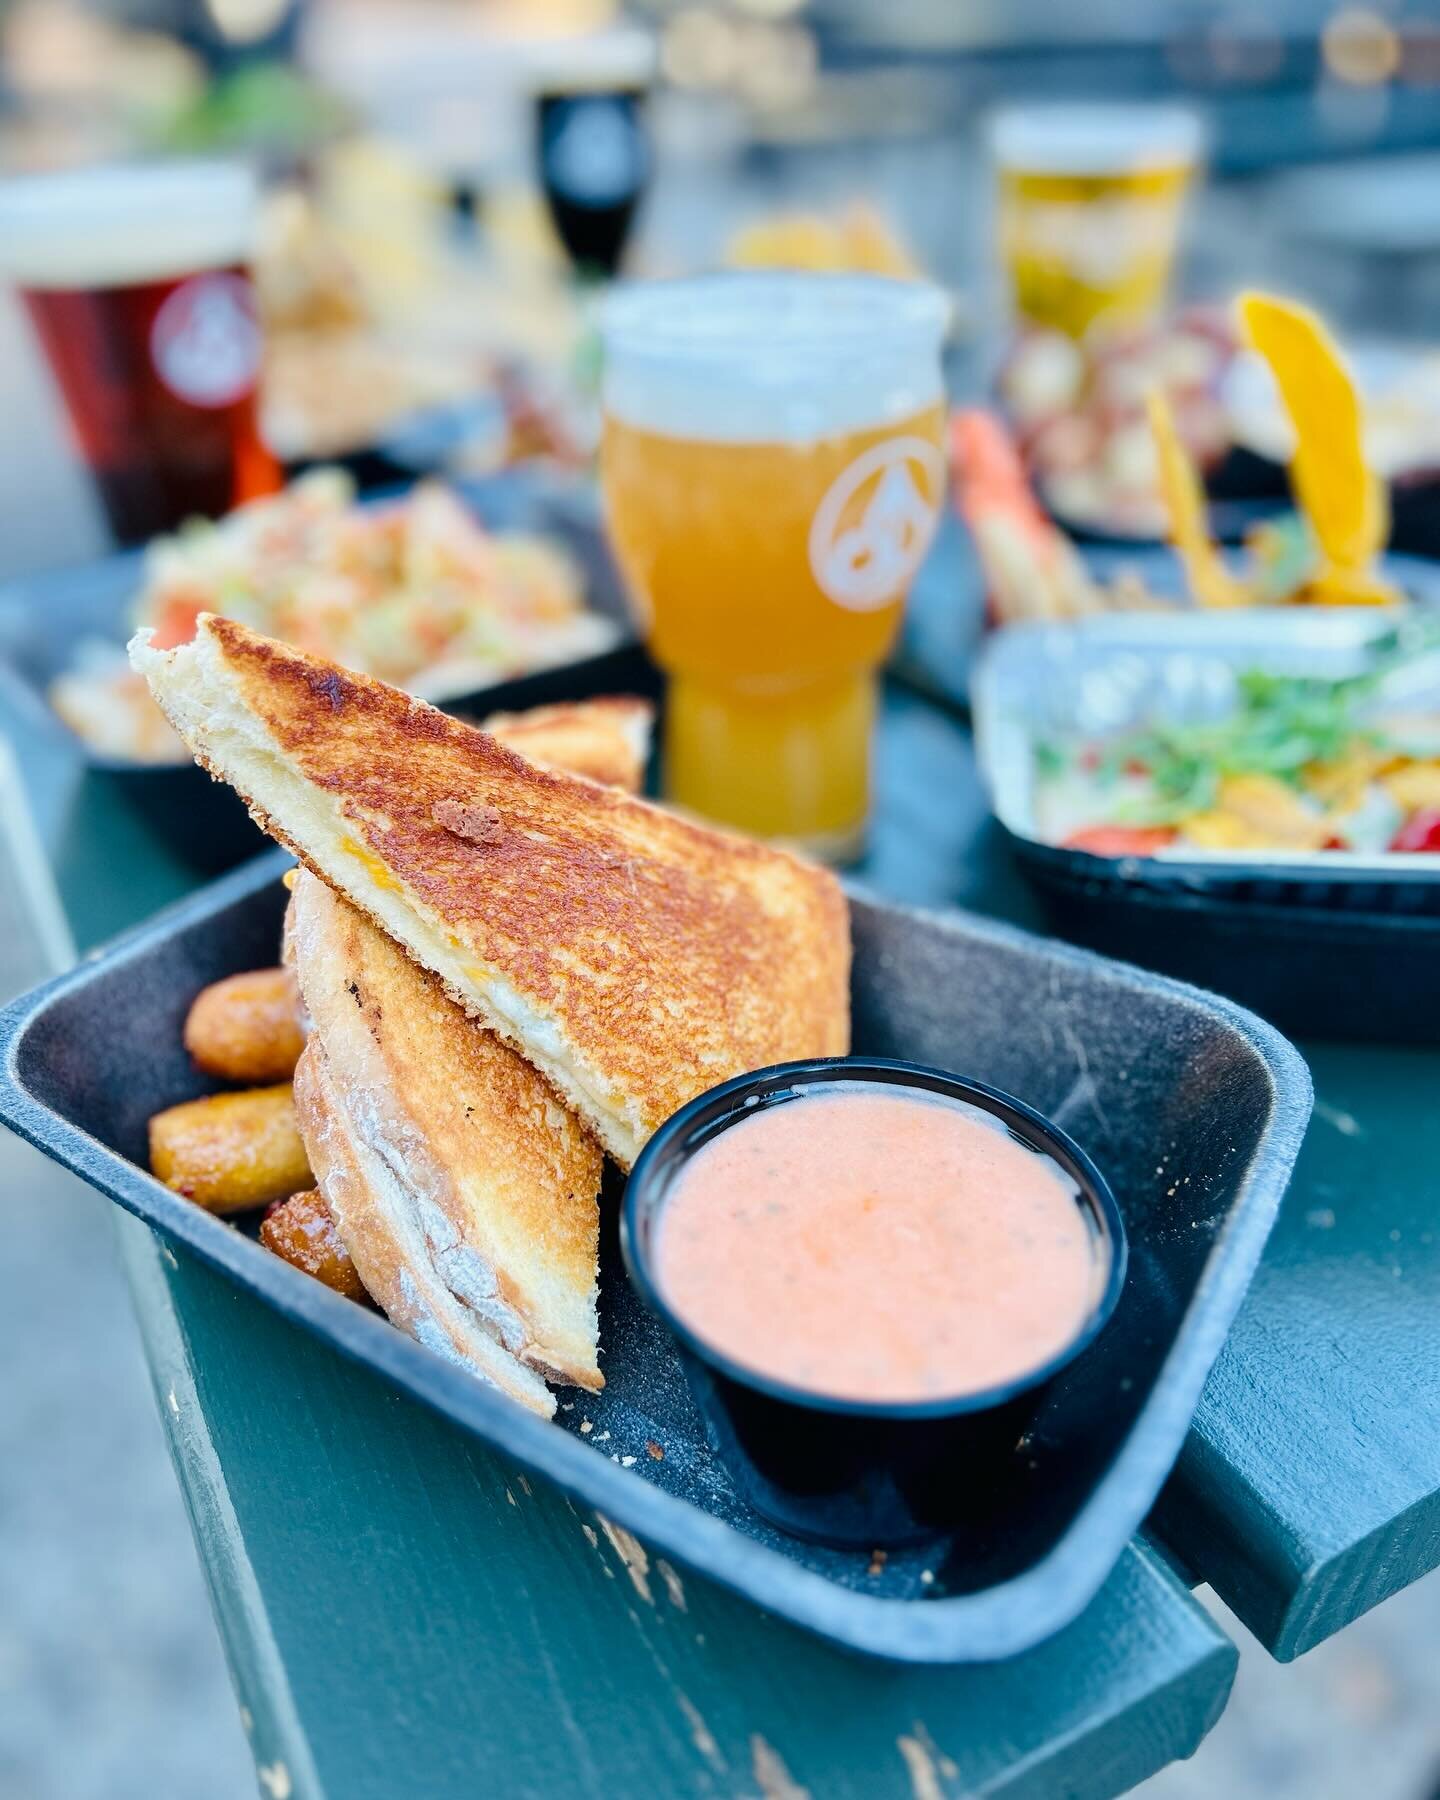 Cure those Wednesday blues with the best grilled cheese in town

4-9pm

#twistedeats #twistedeatstruck #slowplaybrewing #rockhillsc